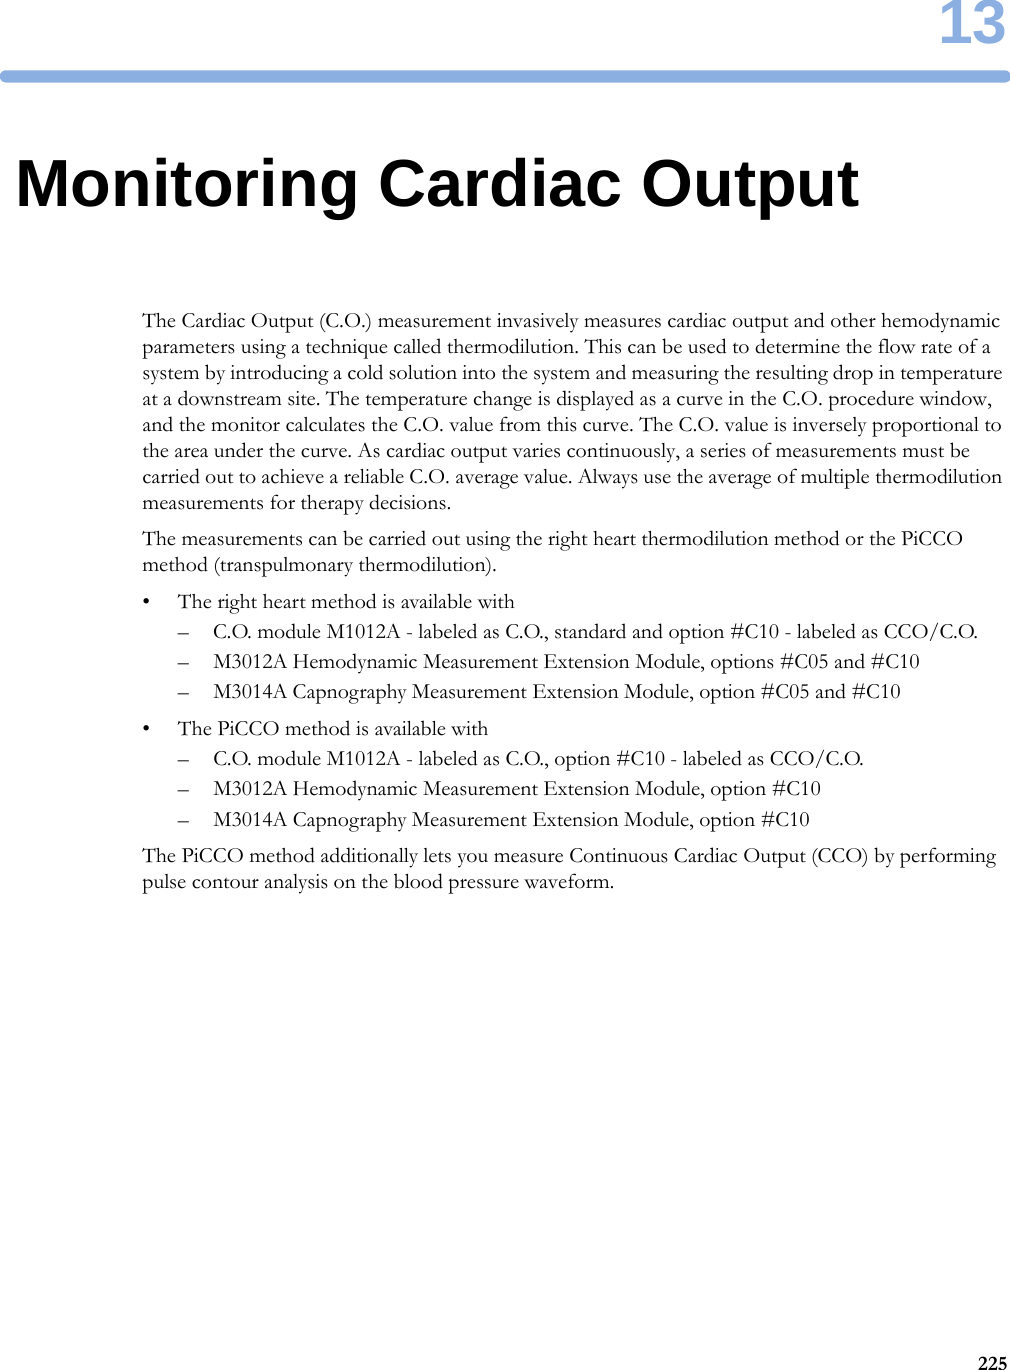 1322513Monitoring Cardiac OutputThe Cardiac Output (C.O.) measurement invasively measures cardiac output and other hemodynamic parameters using a technique called thermodilution. This can be used to determine the flow rate of a system by introducing a cold solution into the system and measuring the resulting drop in temperature at a downstream site. The temperature change is displayed as a curve in the C.O. procedure window, and the monitor calculates the C.O. value from this curve. The C.O. value is inversely proportional to the area under the curve. As cardiac output varies continuously, a series of measurements must be carried out to achieve a reliable C.O. average value. Always use the average of multiple thermodilution measurements for therapy decisions.The measurements can be carried out using the right heart thermodilution method or the PiCCO method (transpulmonary thermodilution).• The right heart method is available with– C.O. module M1012A - labeled as C.O., standard and option #C10 - labeled as CCO/C.O.– M3012A Hemodynamic Measurement Extension Module, options #C05 and #C10– M3014A Capnography Measurement Extension Module, option #C05 and #C10• The PiCCO method is available with– C.O. module M1012A - labeled as C.O., option #C10 - labeled as CCO/C.O.– M3012A Hemodynamic Measurement Extension Module, option #C10– M3014A Capnography Measurement Extension Module, option #C10The PiCCO method additionally lets you measure Continuous Cardiac Output (CCO) by performing pulse contour analysis on the blood pressure waveform.